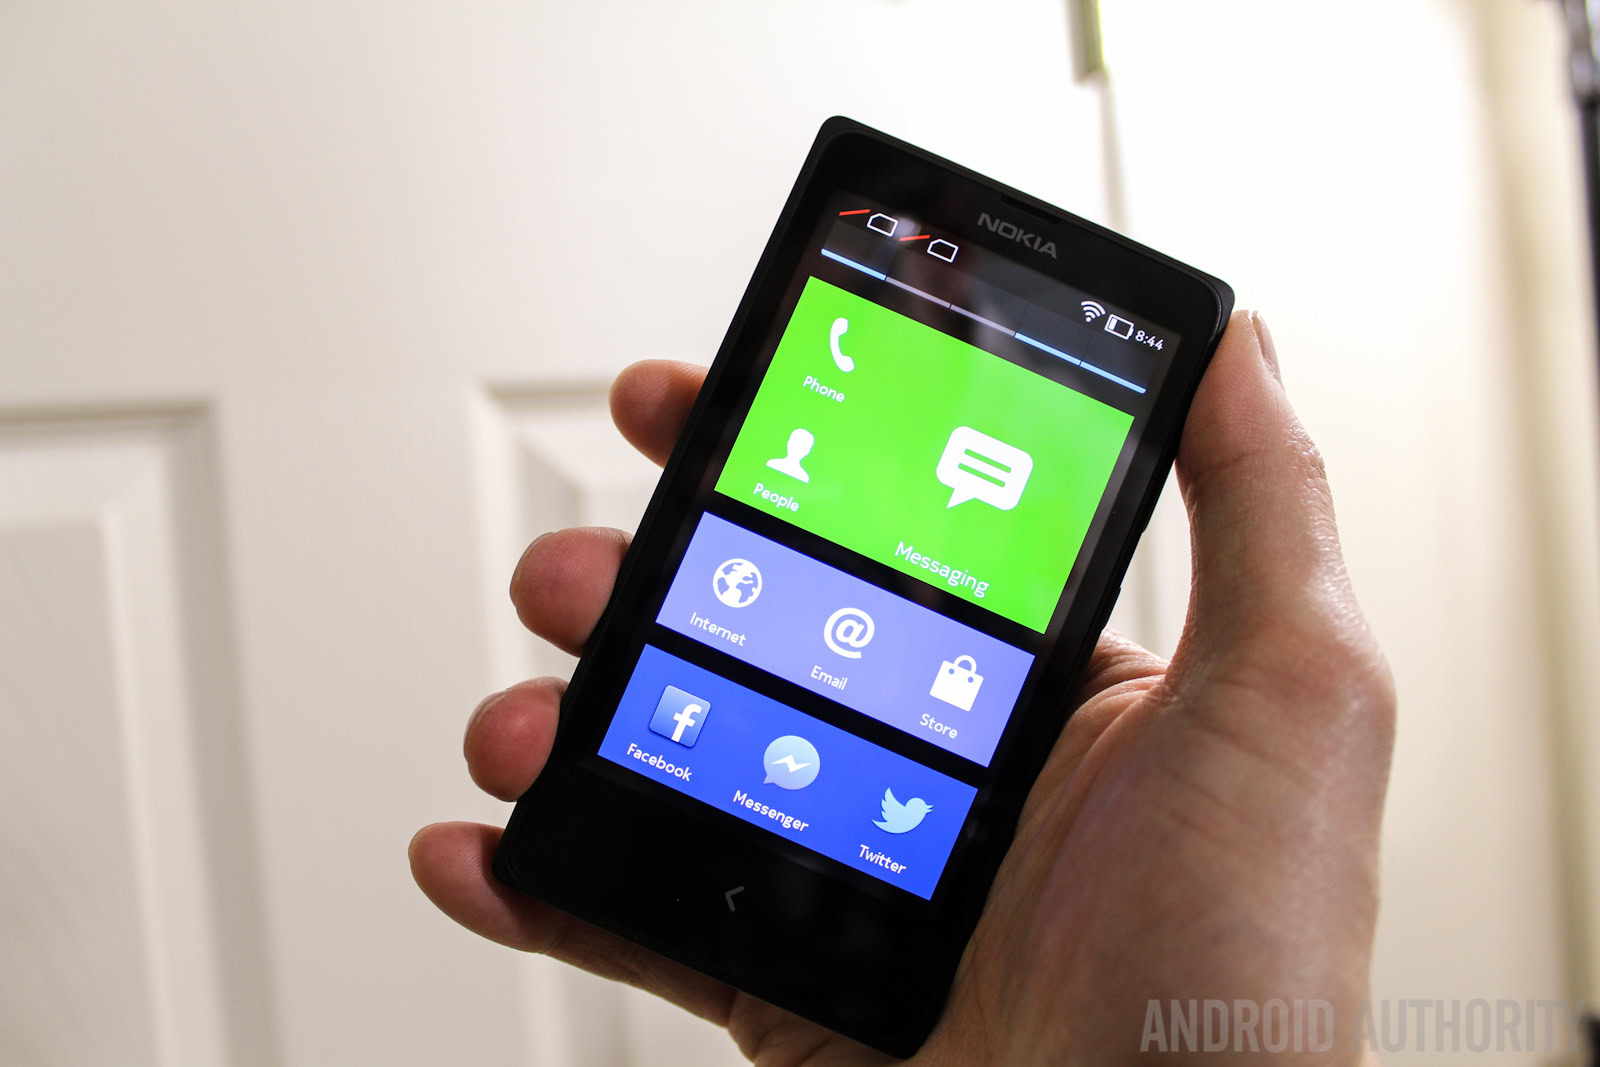  Nokia X review Nokia meets Android